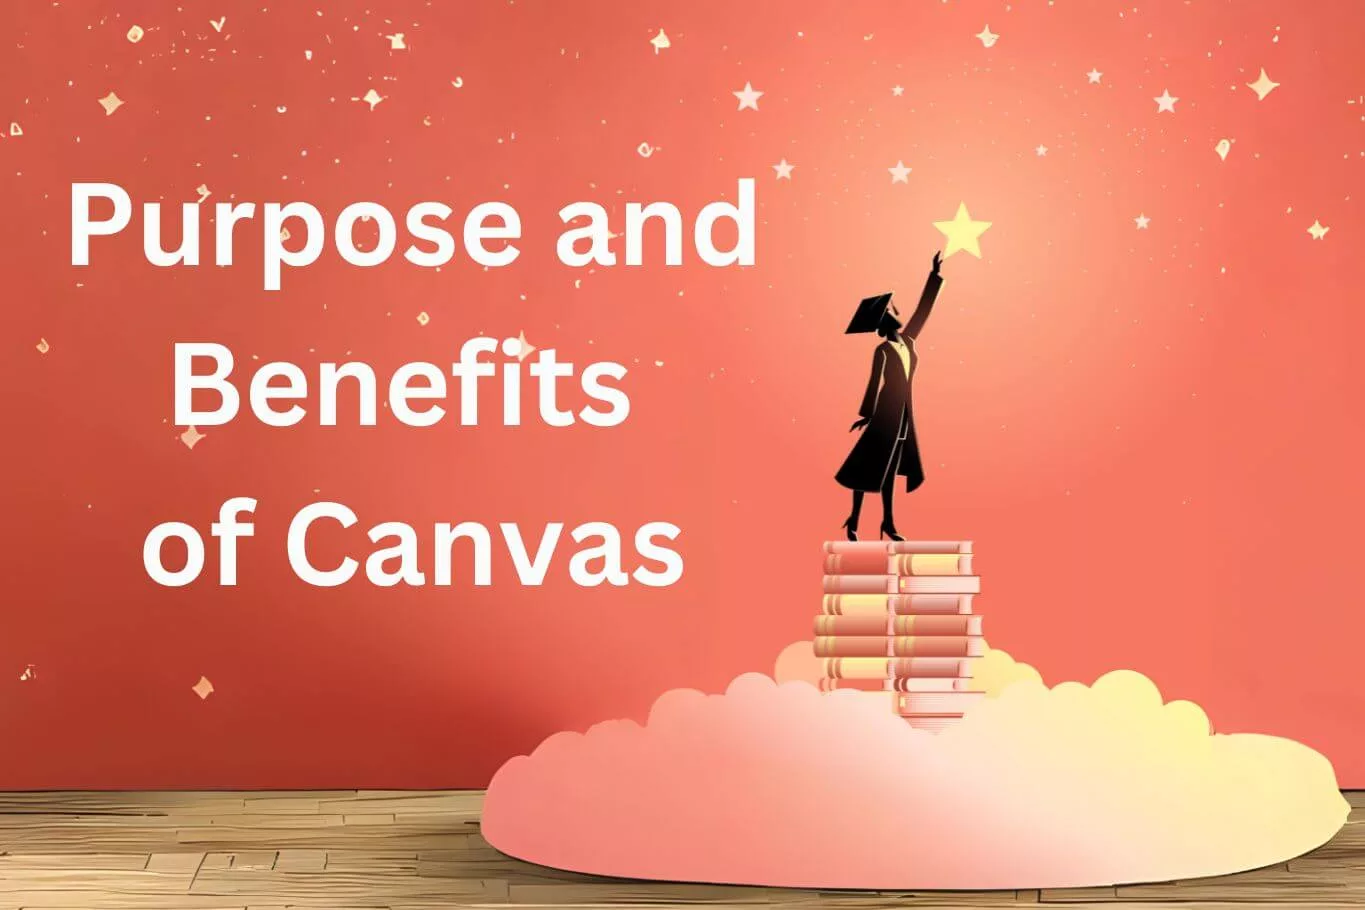 Purpose and Benefits of Canvas